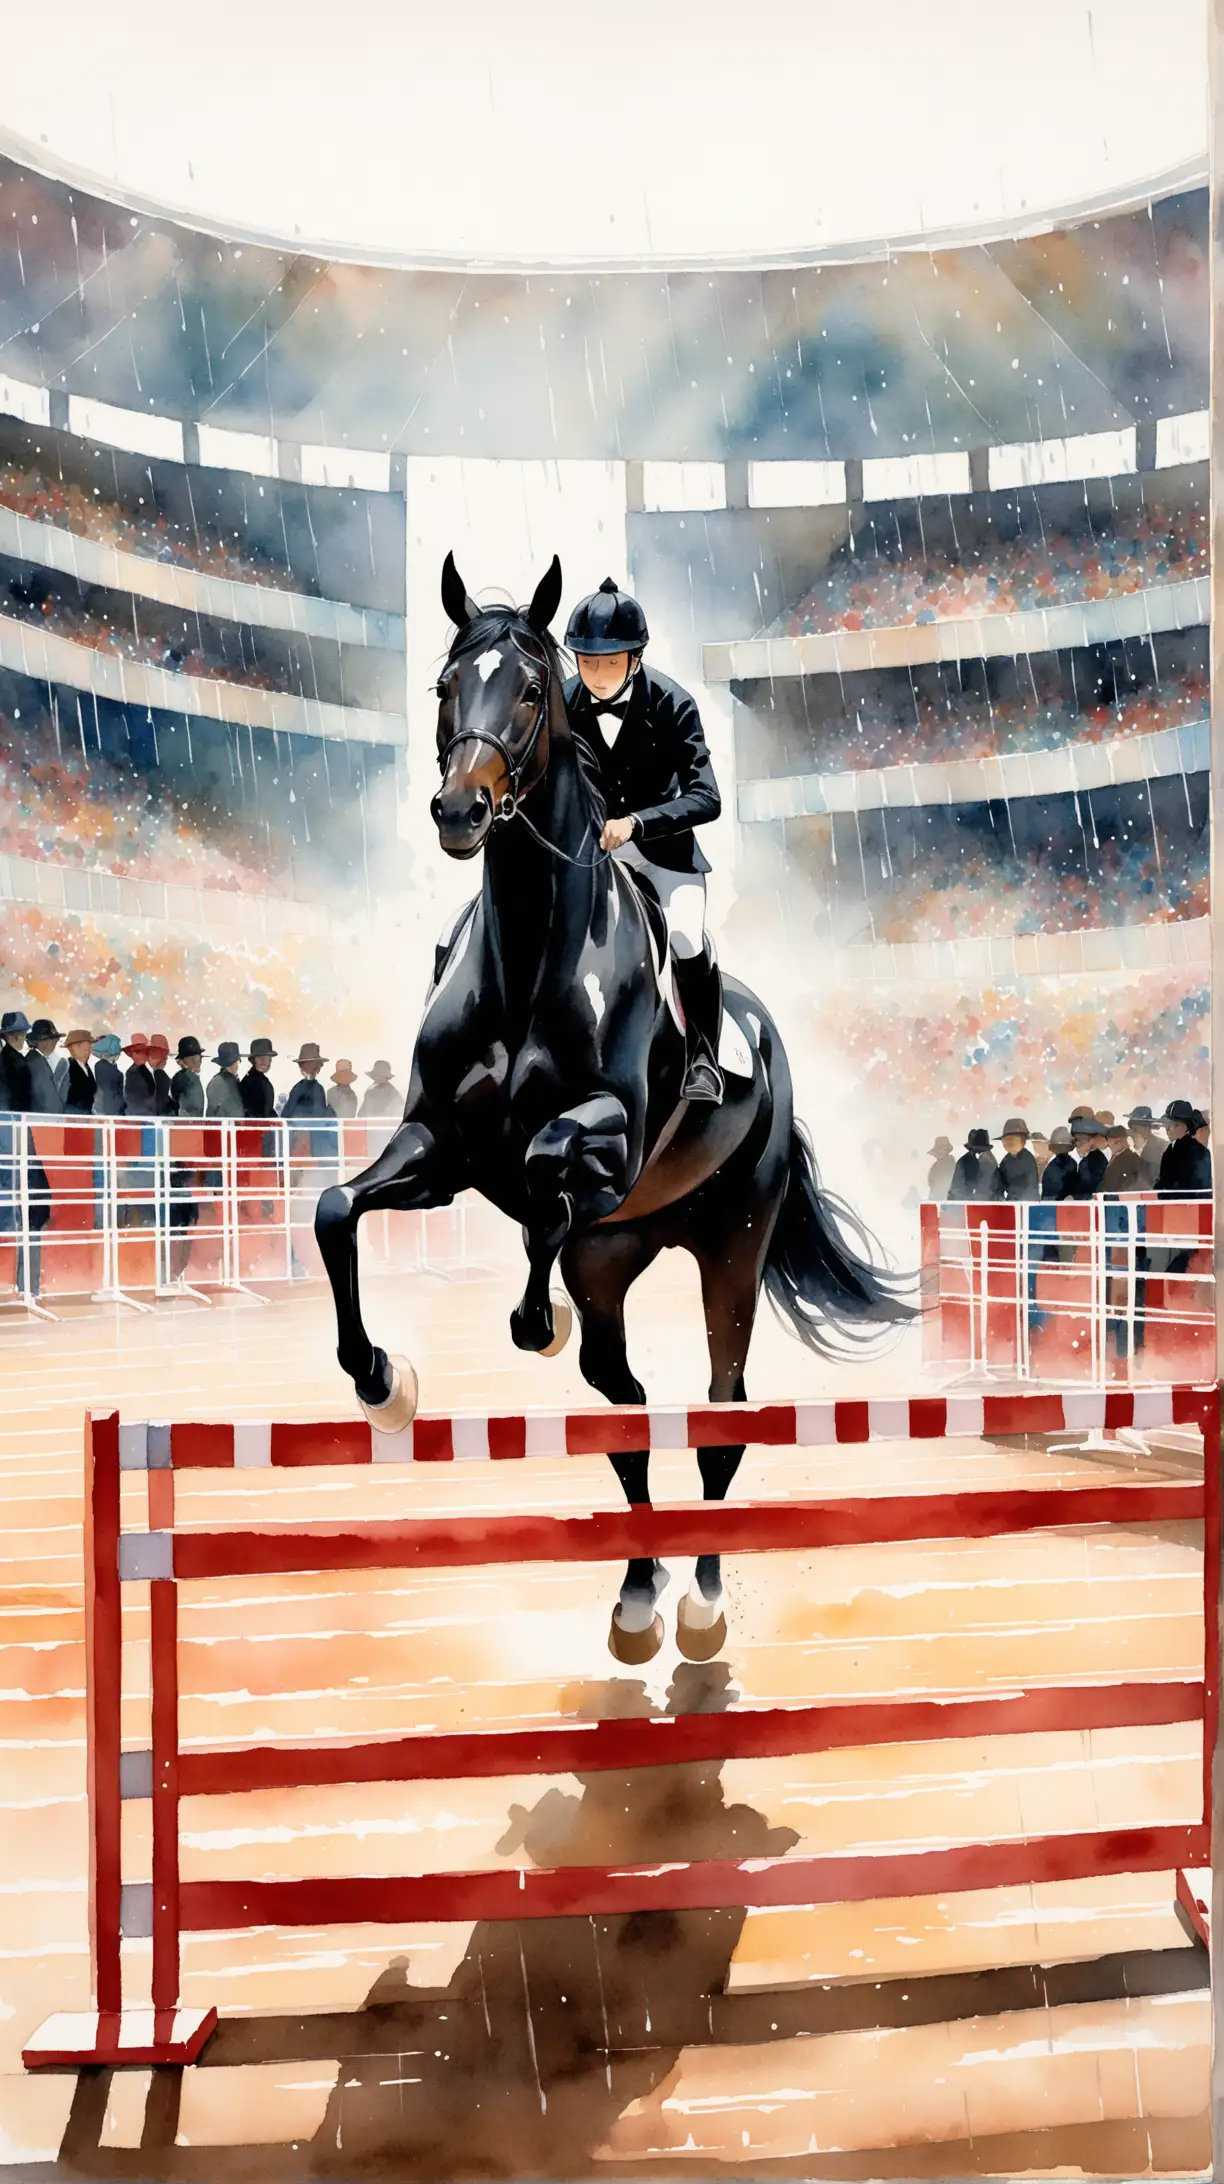 Elegant Black Horse Jumping Over Vibrant Hurdles in an Arena Amidst an Enthusiastic Audience